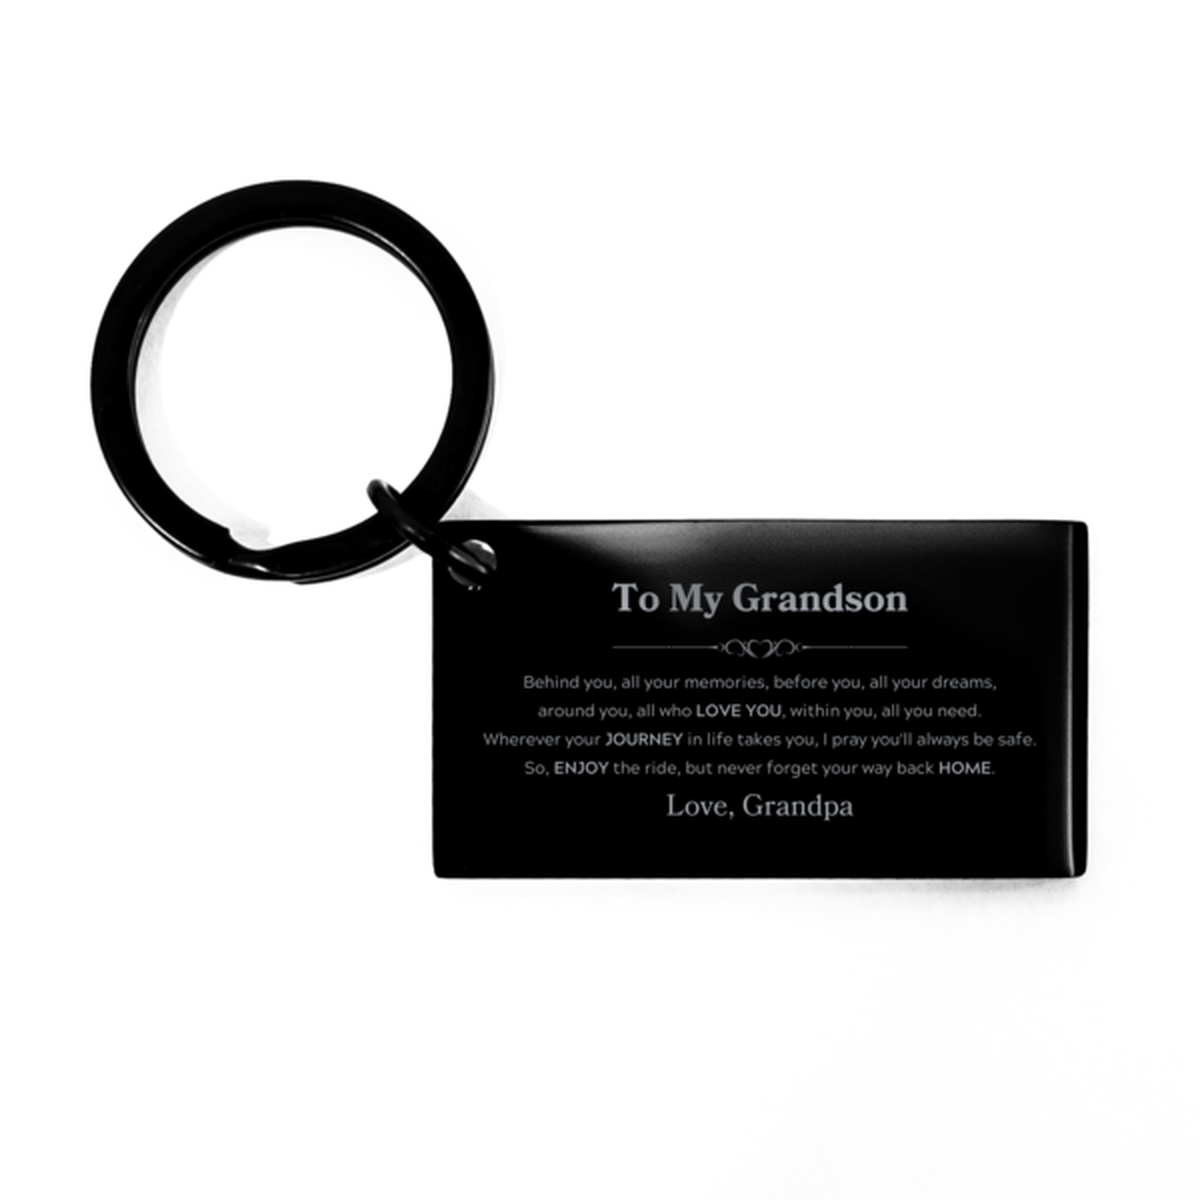 To My Grandson Graduation Gifts from Grandpa, Grandson Keychain Christmas Birthday Gifts for Grandson Behind you, all your memories, before you, all your dreams. Love, Grandpa